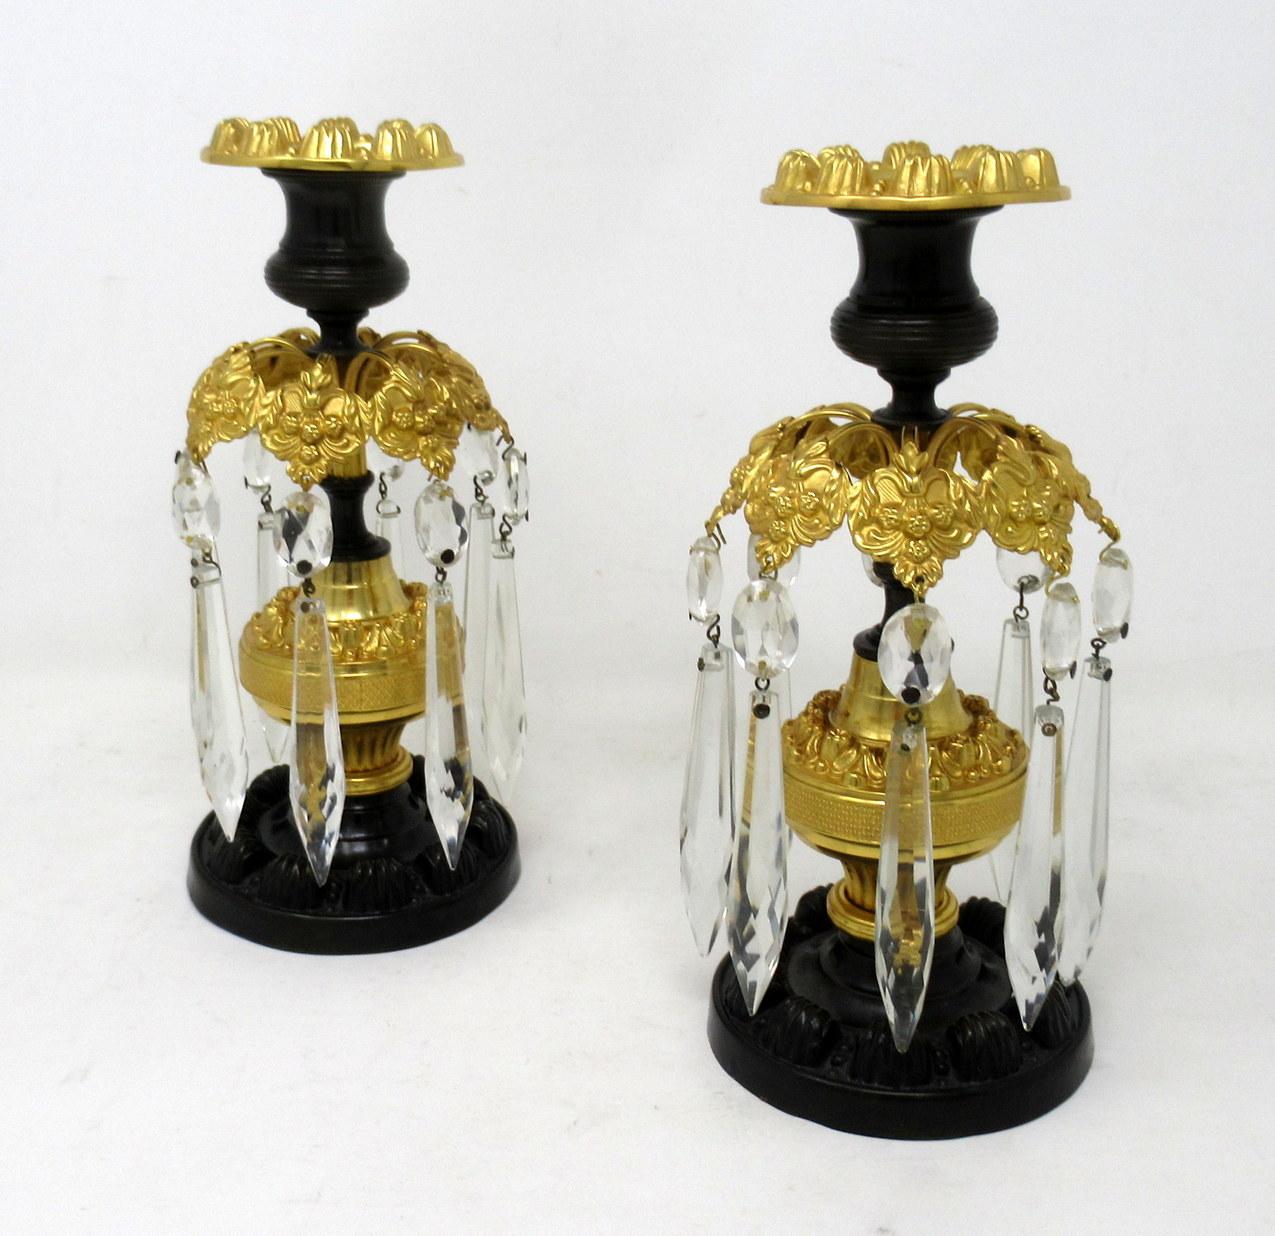 A stylish pair of English regency period patinated bronze and ormolu weighted table or mantle single light lustres of superb craftsmanship and quality. First quarter of the nineteenth century.

Each candlestick with bronze reeded sconce above